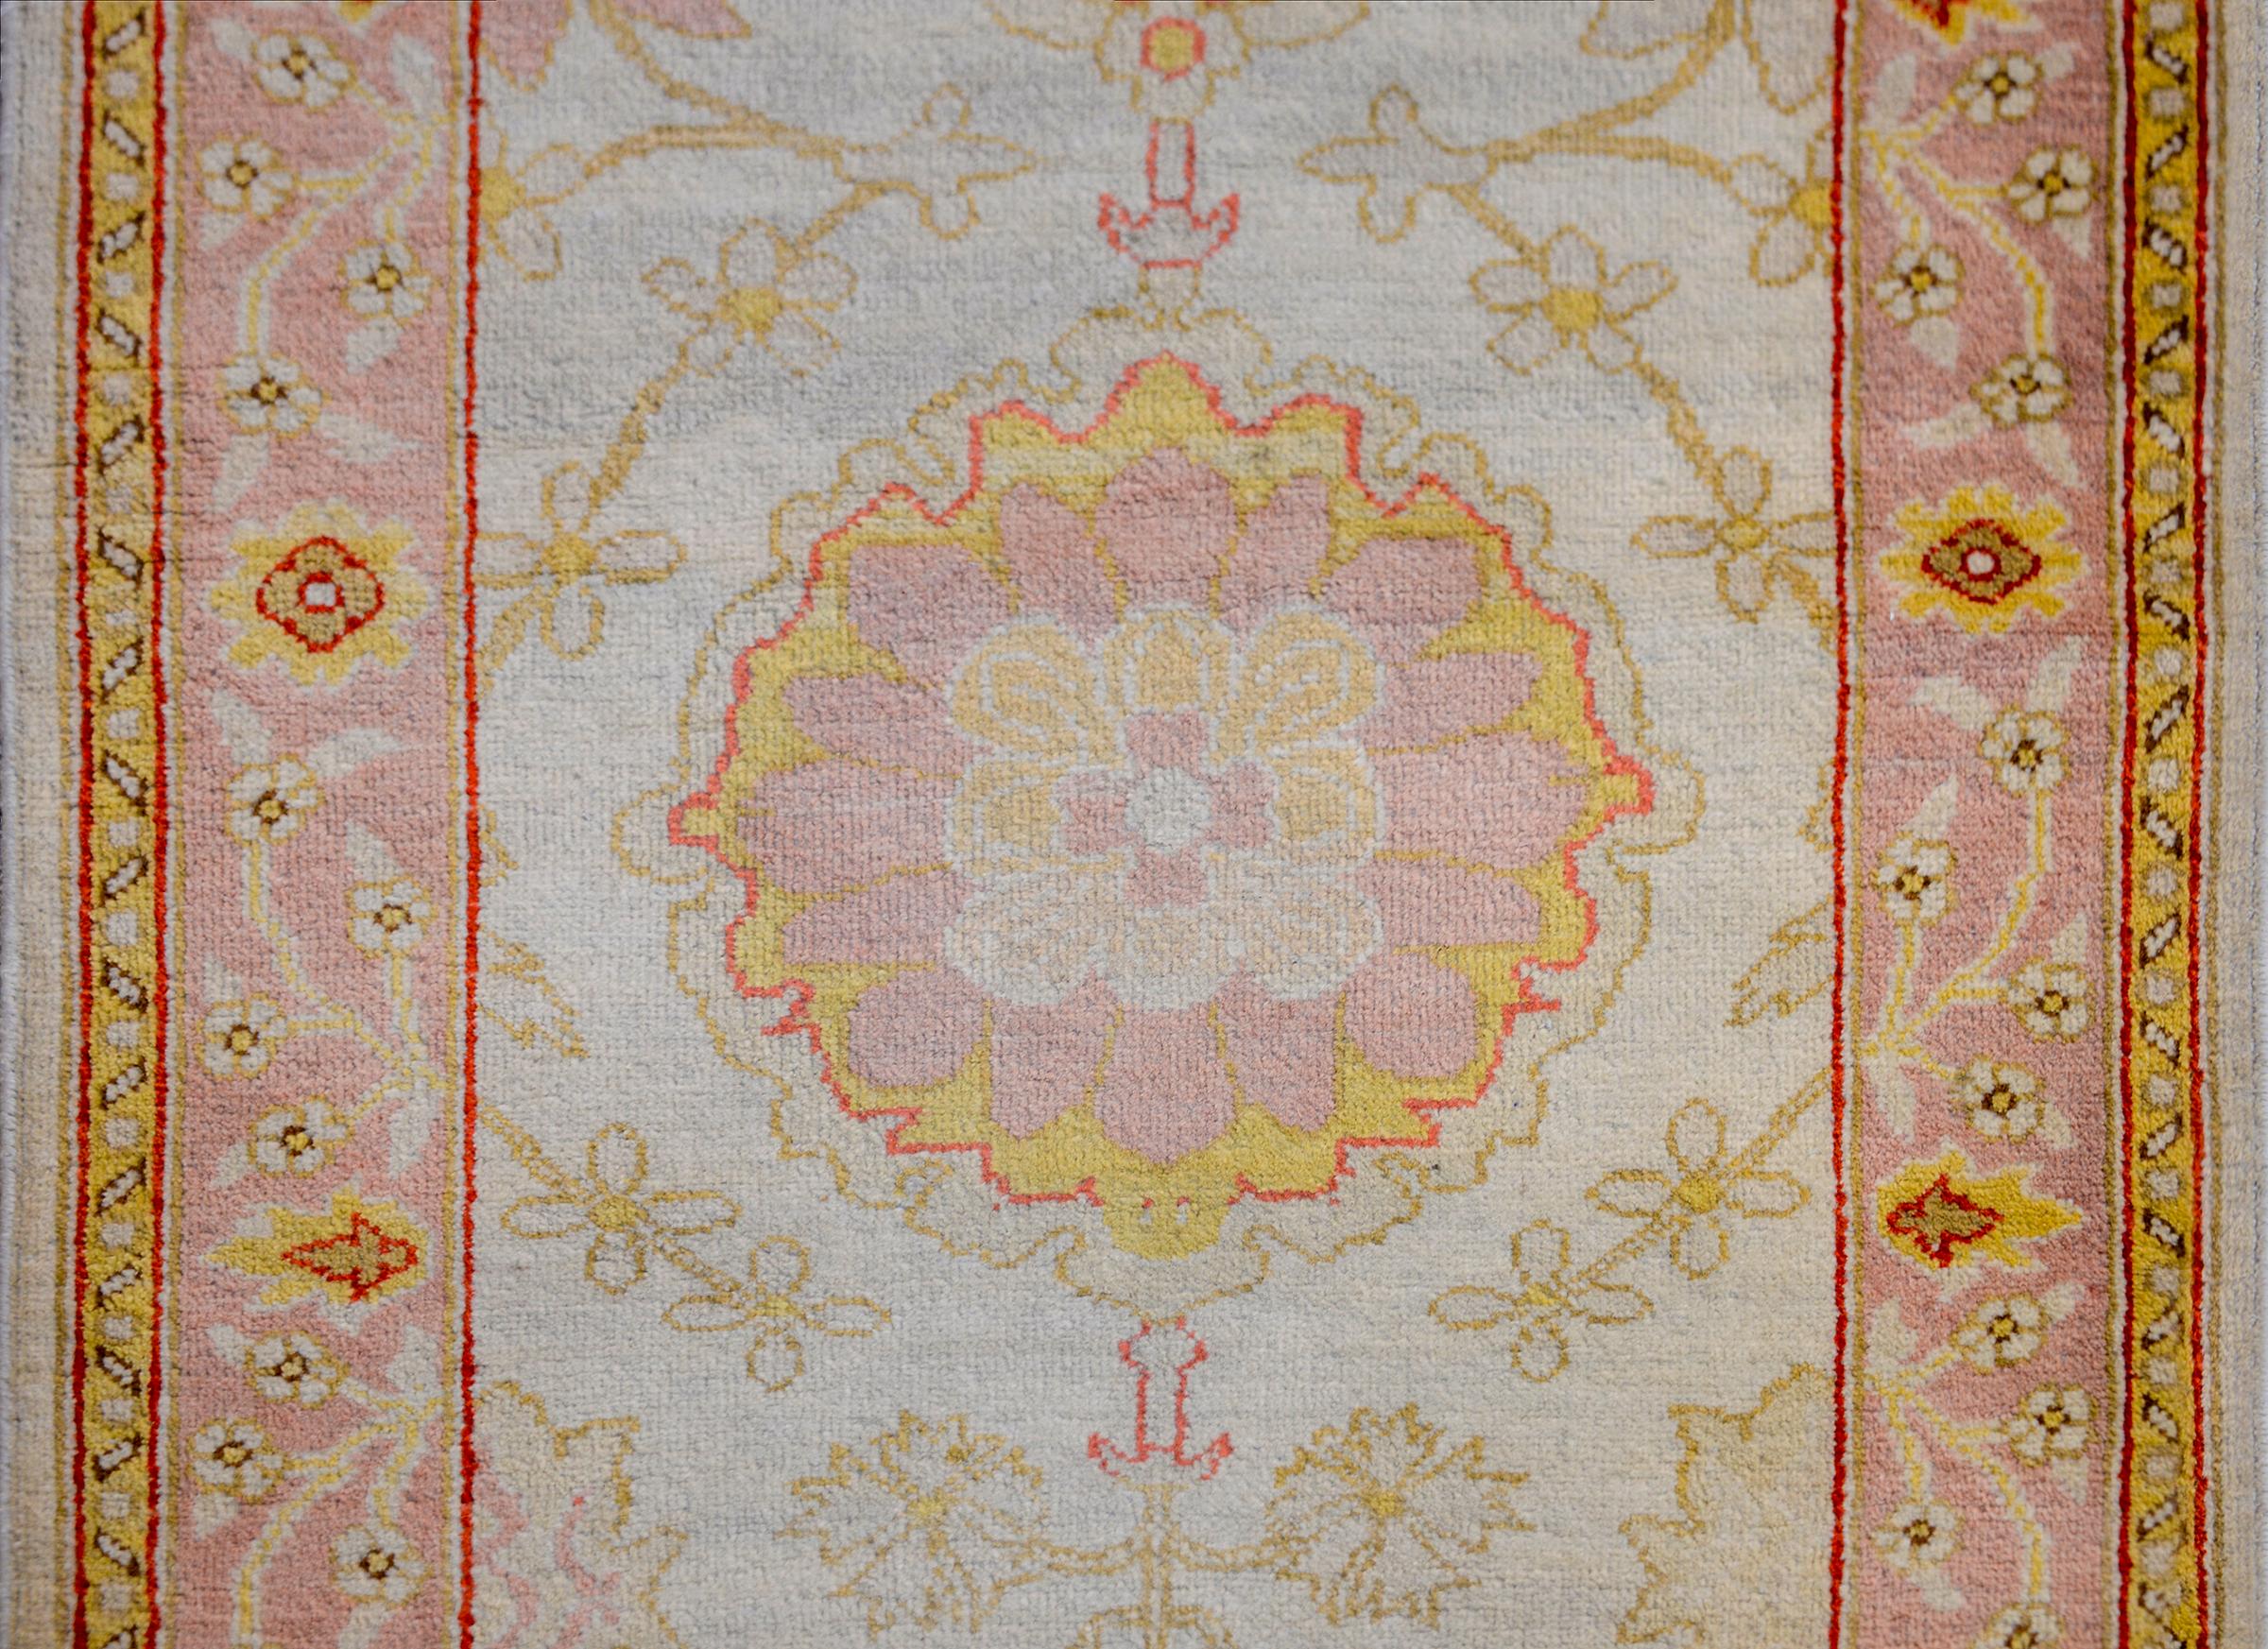 A colossal early 20th century Turkish Oushak runner with multiple round floral medallions rendered in lilac, gold, and crimson, on a pale indigo background with green scrolling vines and flowers. The border is simple, with a wide inner floral and